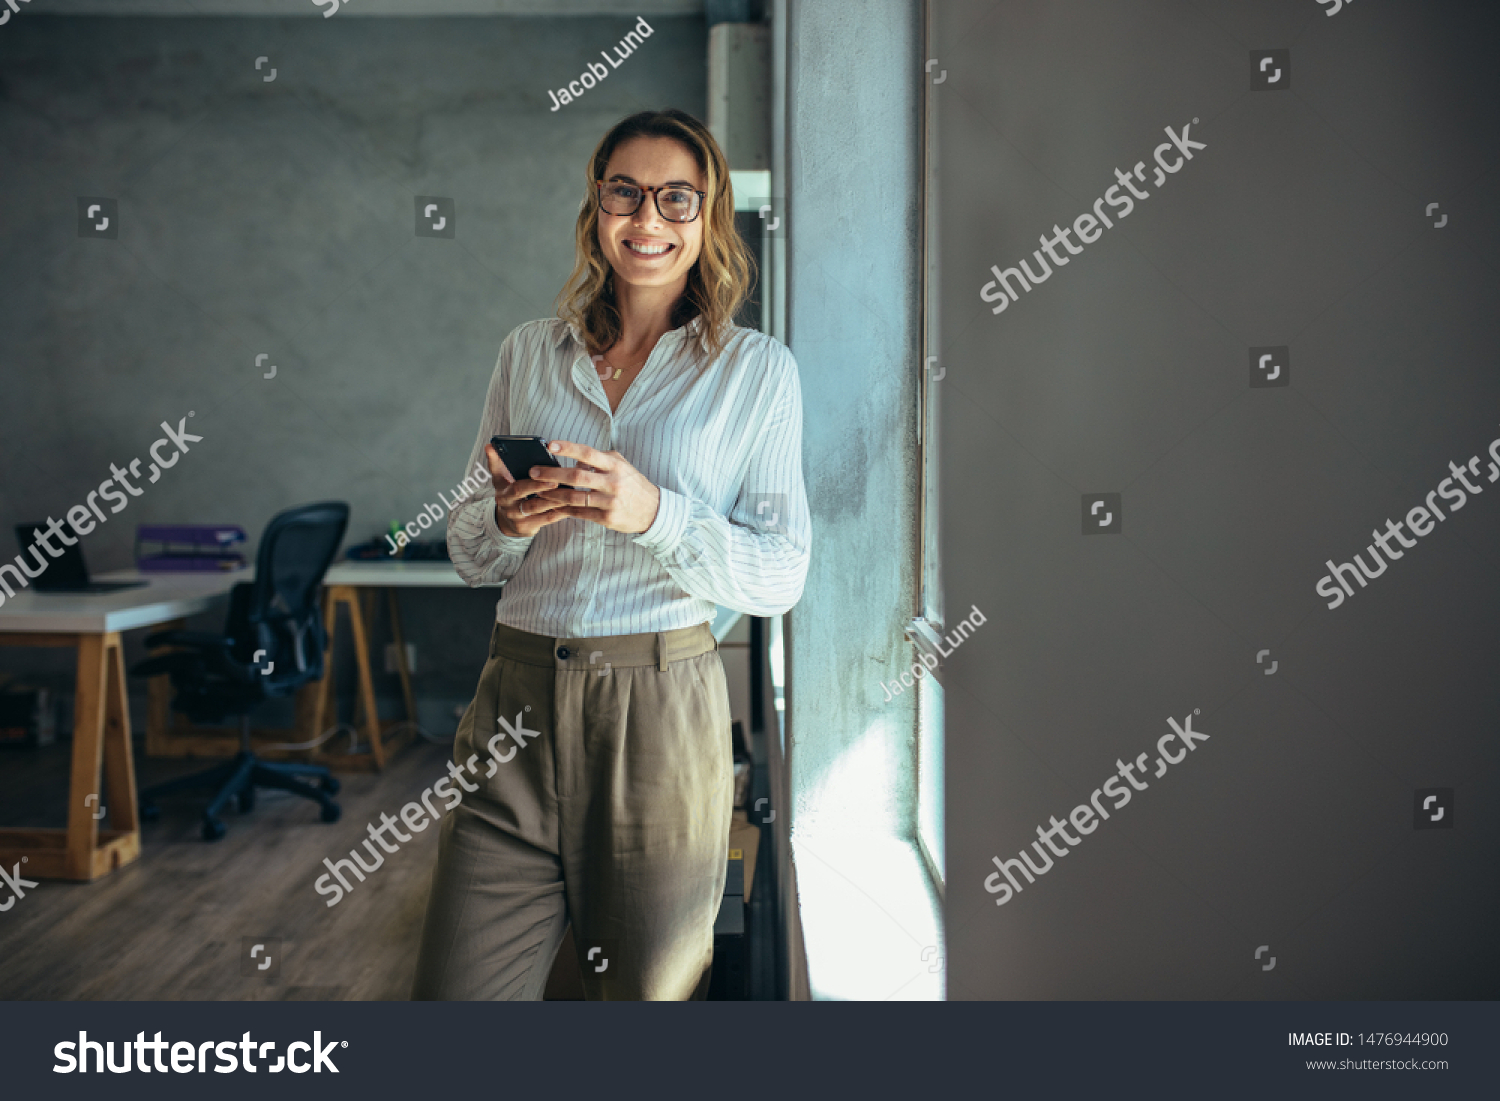 Smiling woman in casuals standing in office. Businesswoman with mobile phone in hand looking at camera. #1476944900